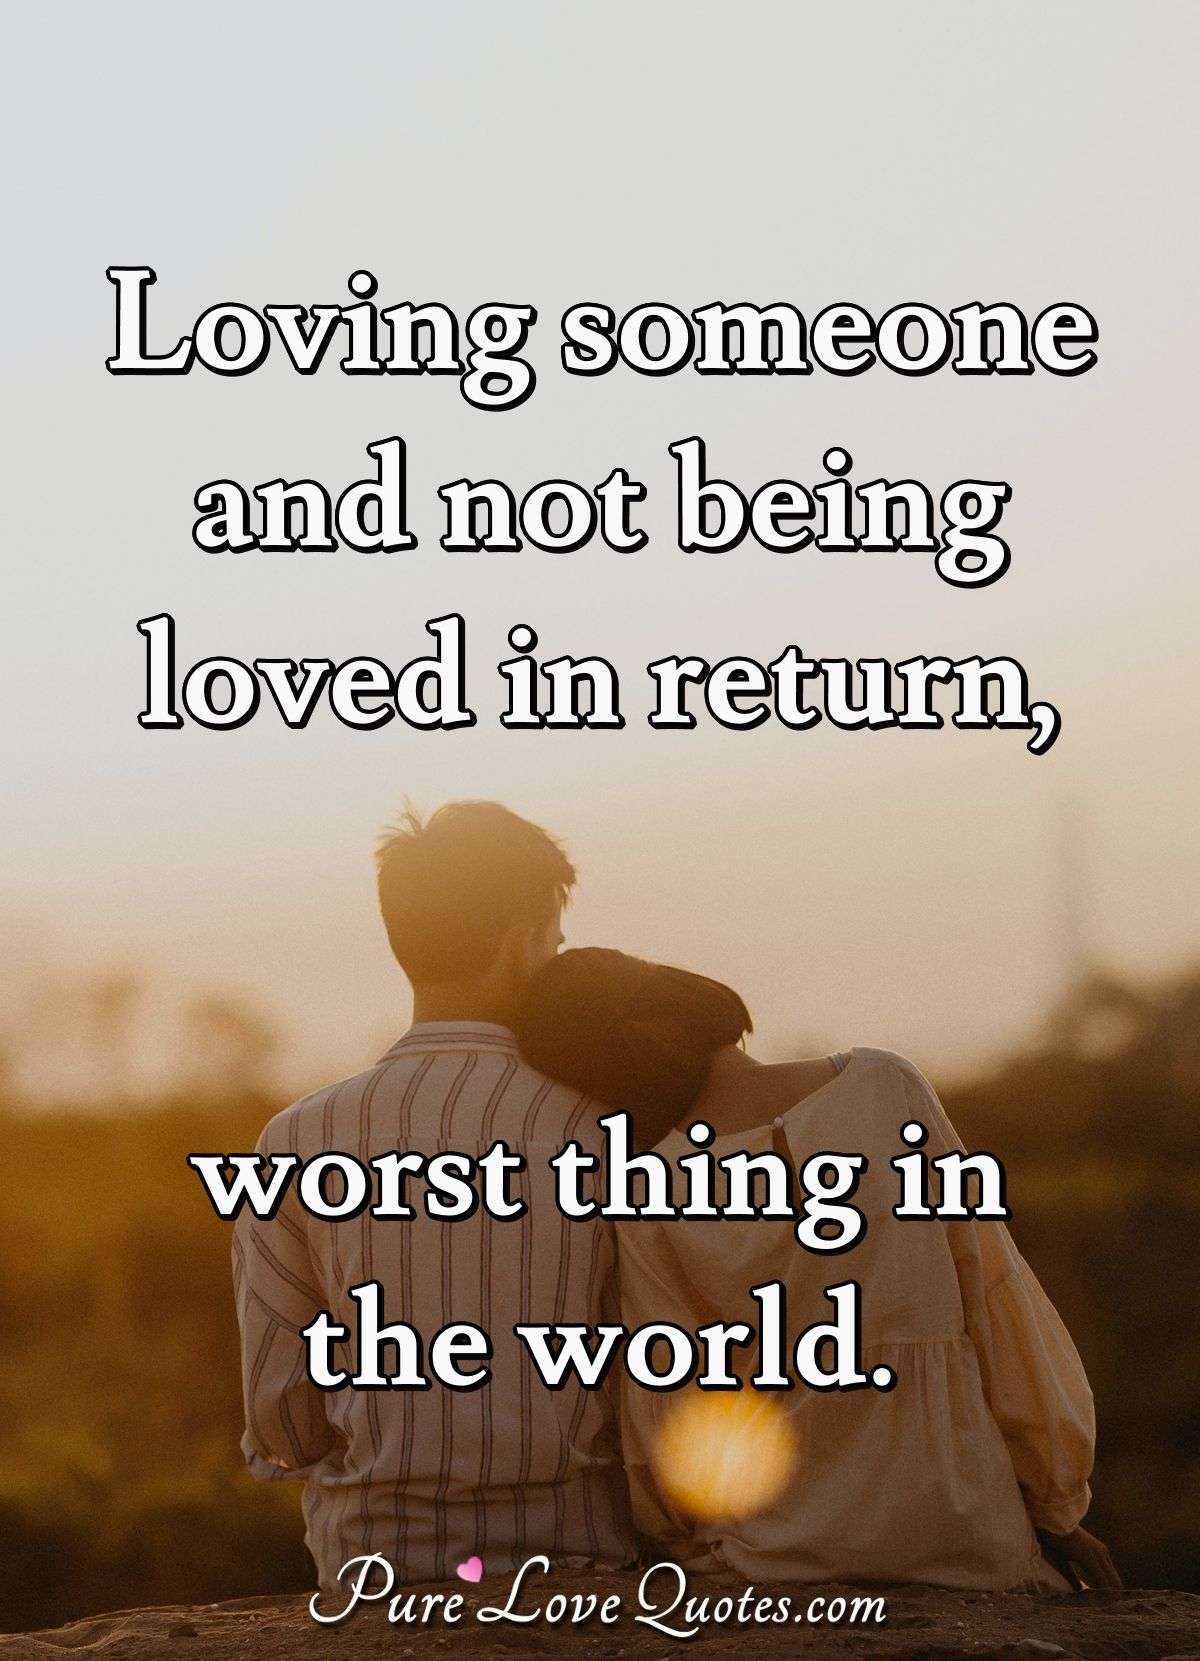 Loving someone and not being loved in return, worst thing in the world. - Anonymous